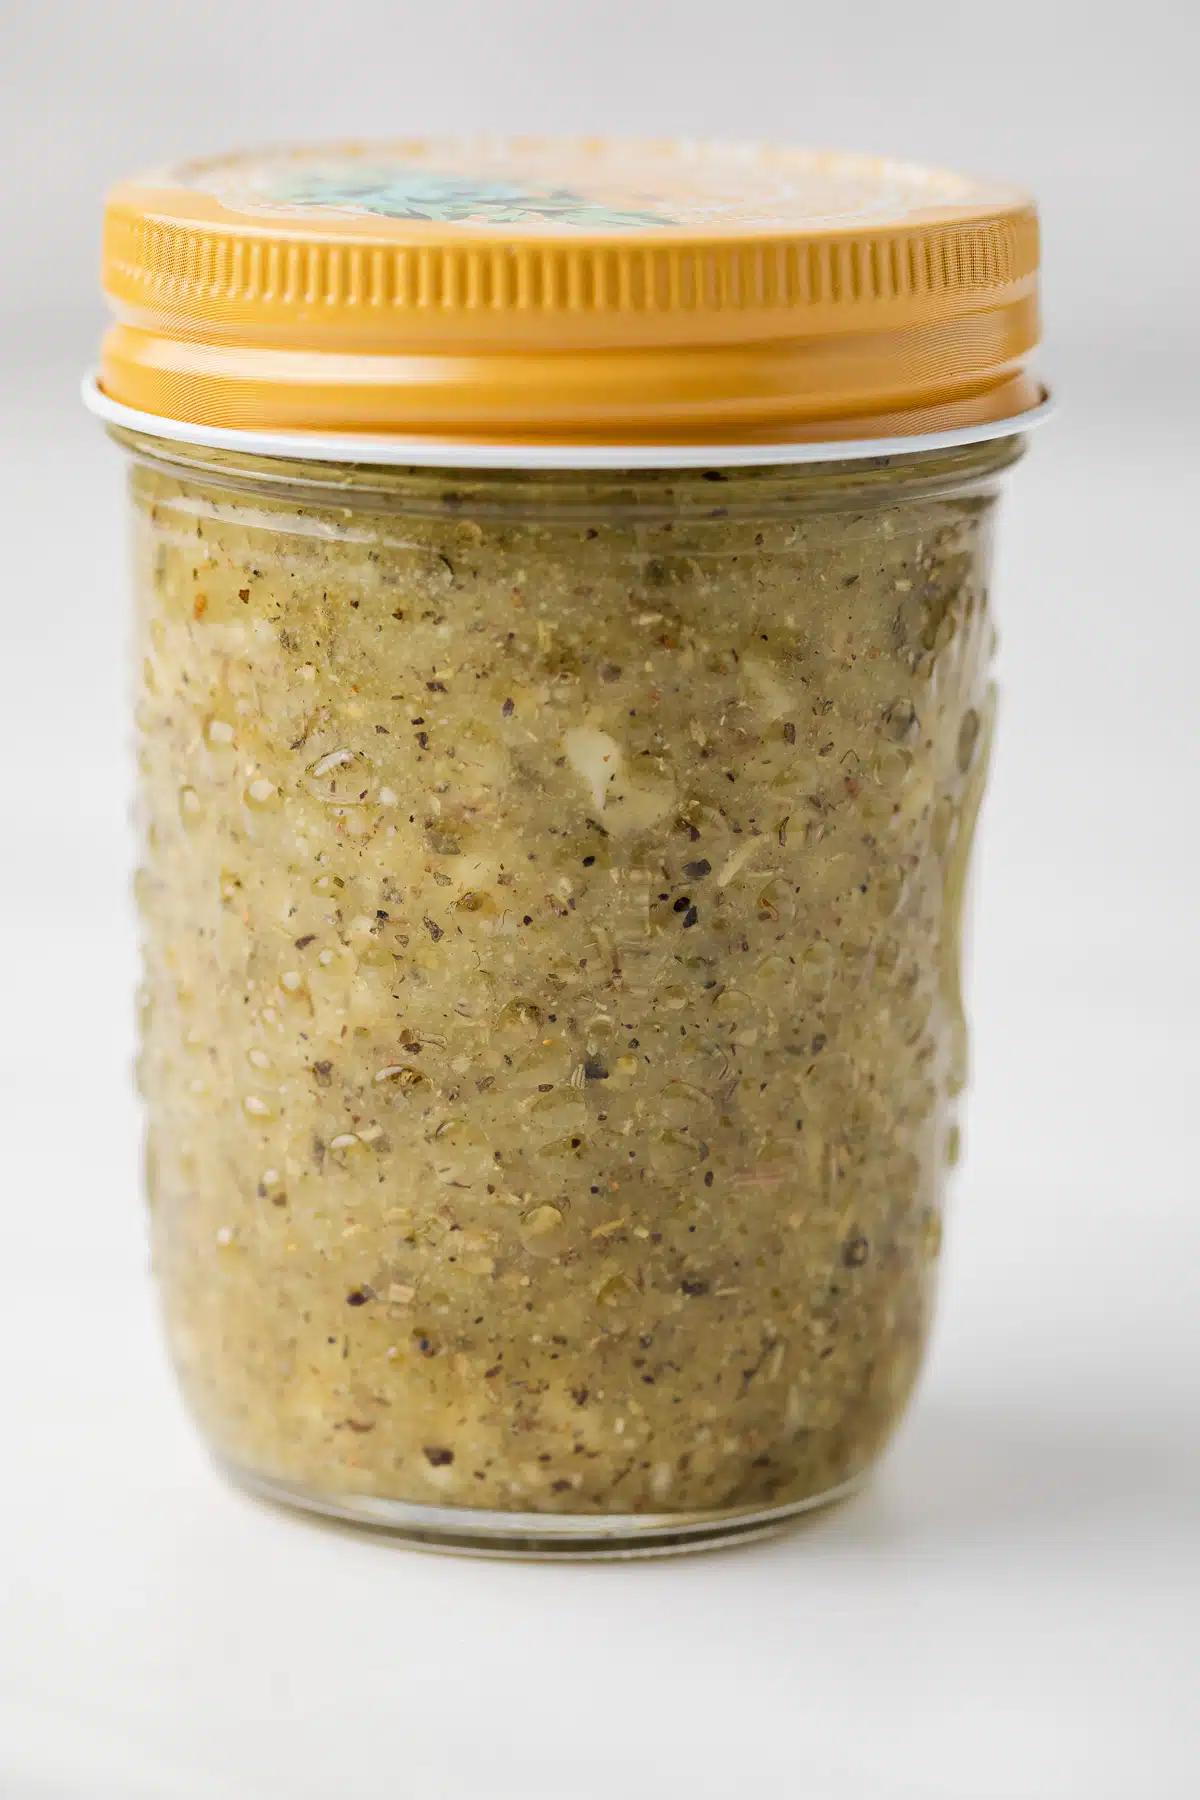 Italian dressing chicken marinade in a glass jar with a lid.